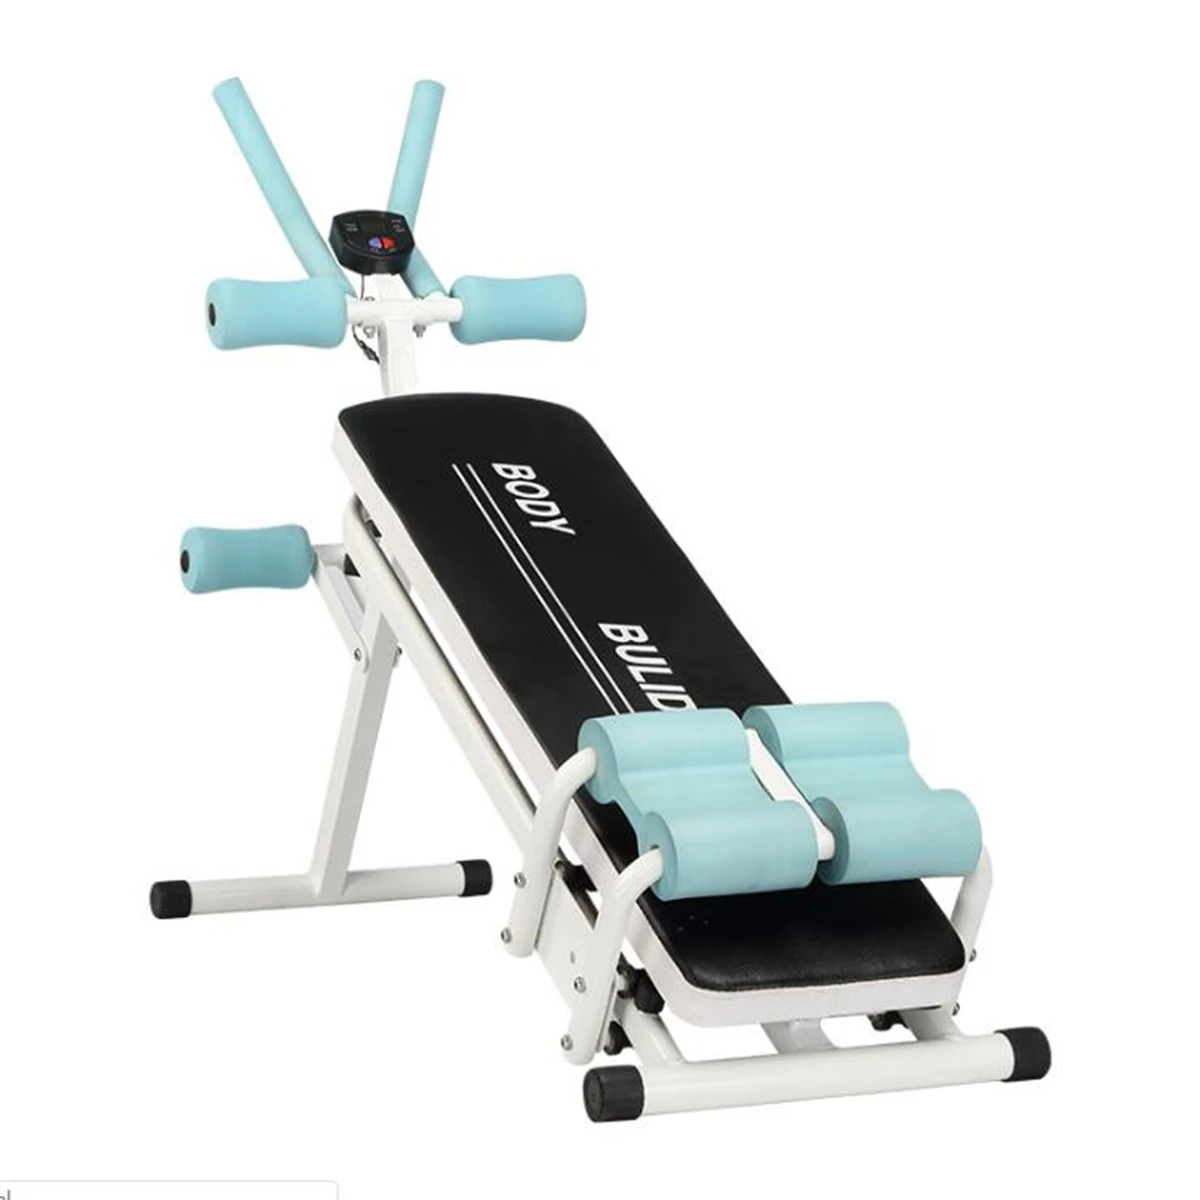 Fitness, Gym & Exercise equipment Canada. GRT Products H49e34c98f25f45dcb0a235b12d151035v 3 Levels Adjustable Sit Up Benches Abdominal Muscle Trainer Multifunction Abs Workout Lose Weight Home Gym Fitness Equipment  